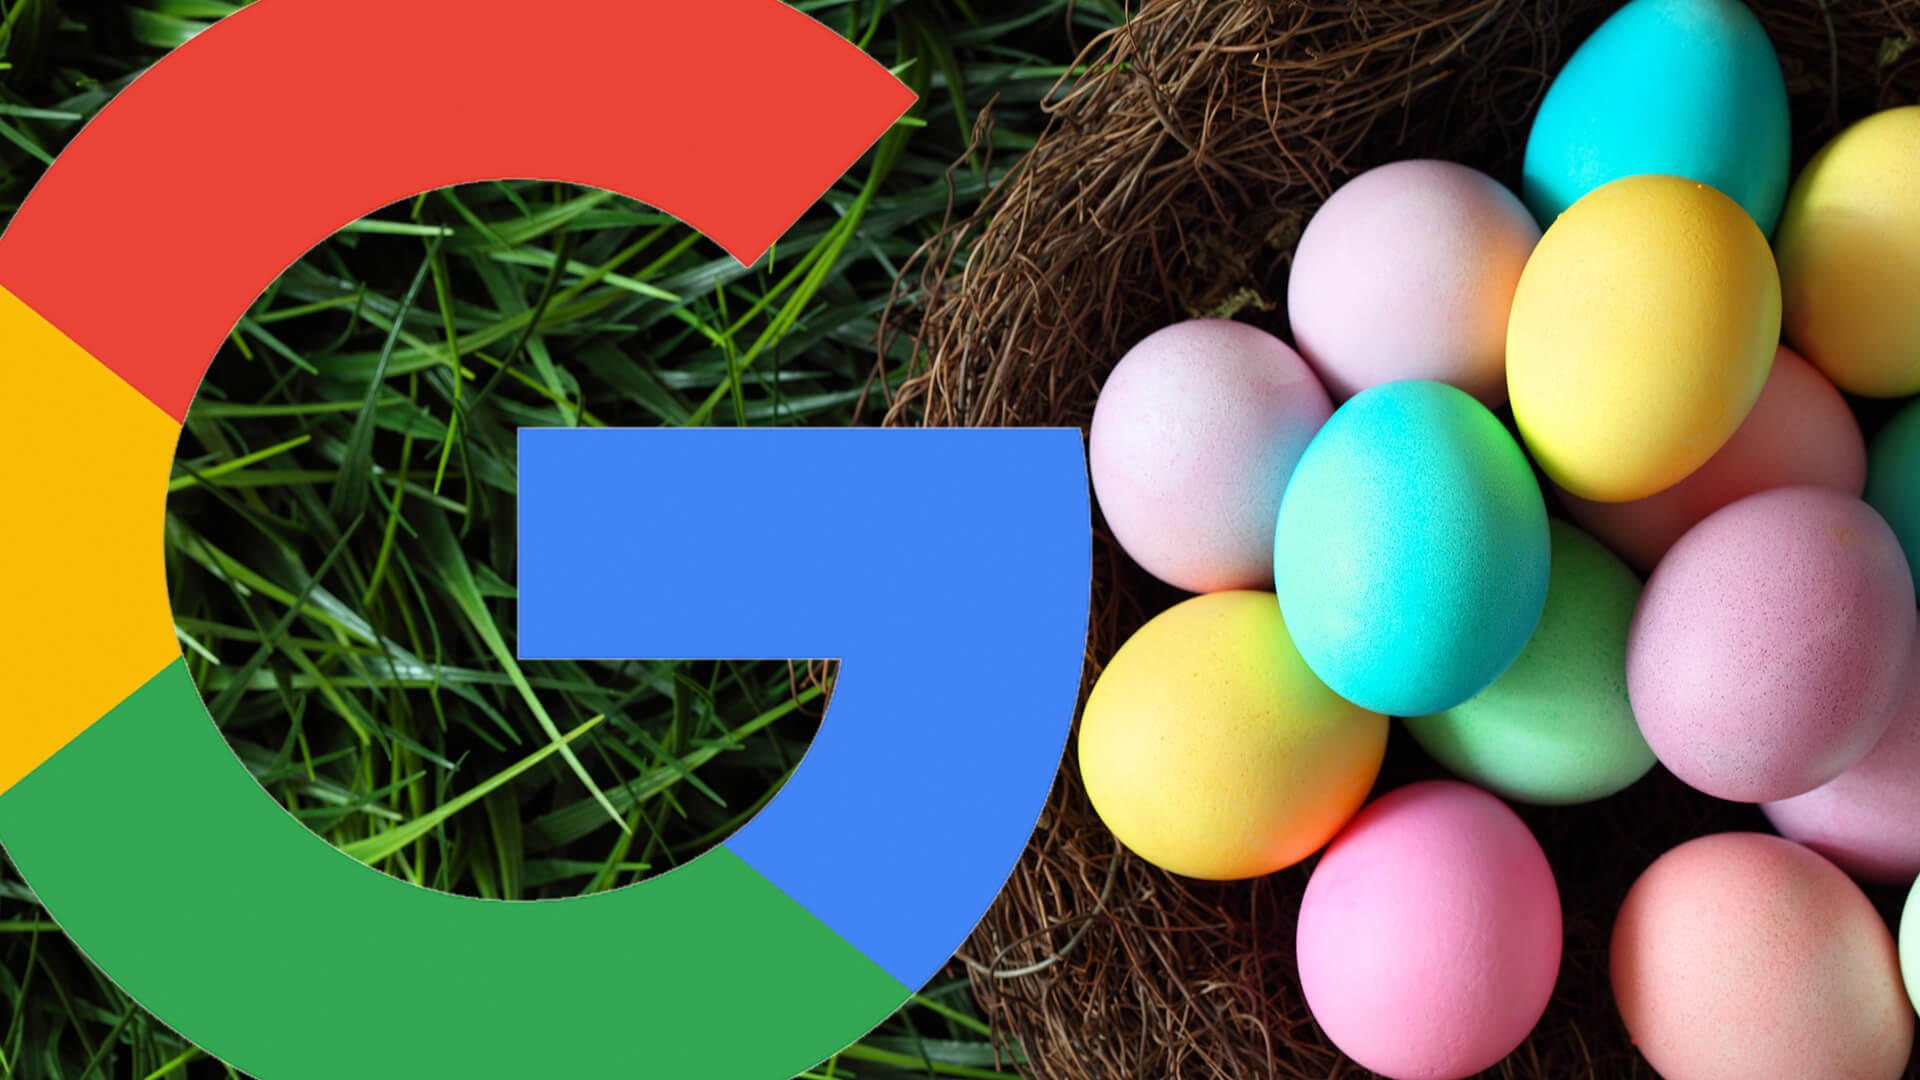 Google's latest Search Easter egg lets you relive a classic moment